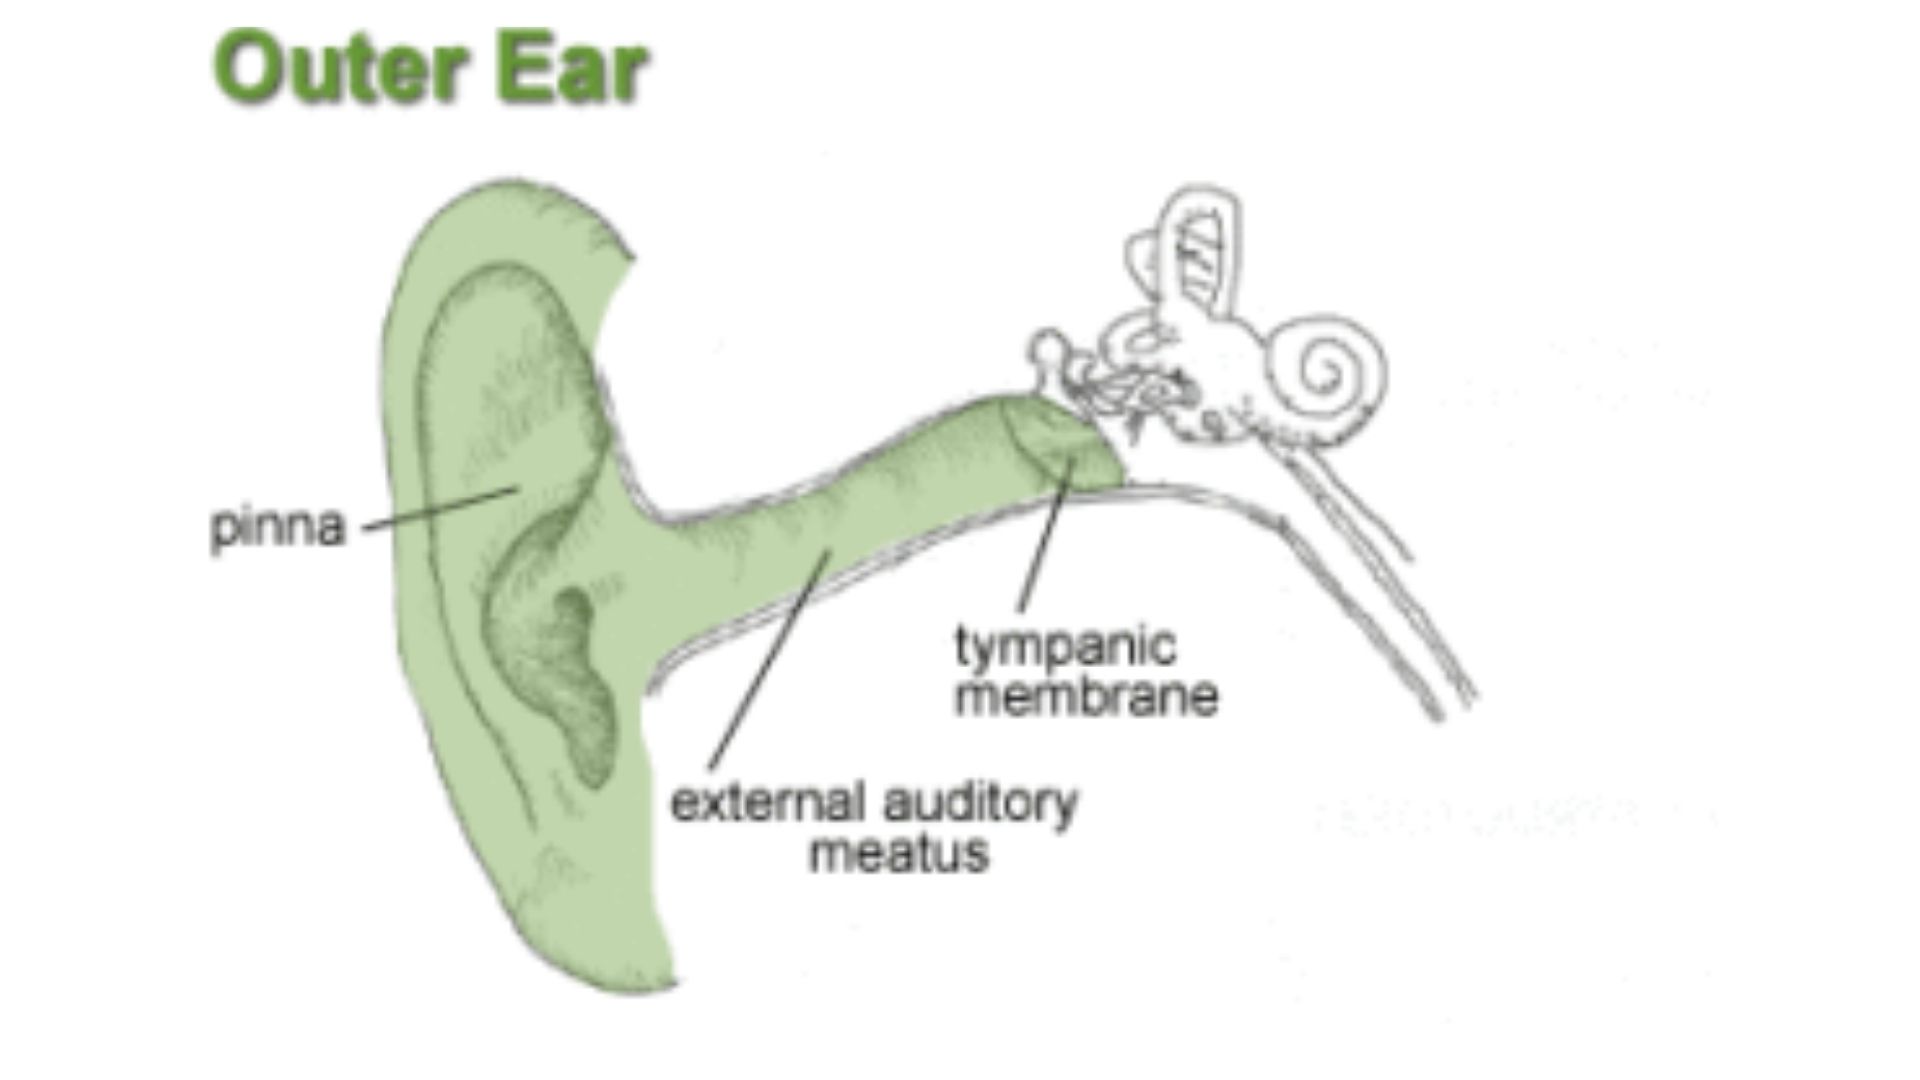 outer ear image with descriptions